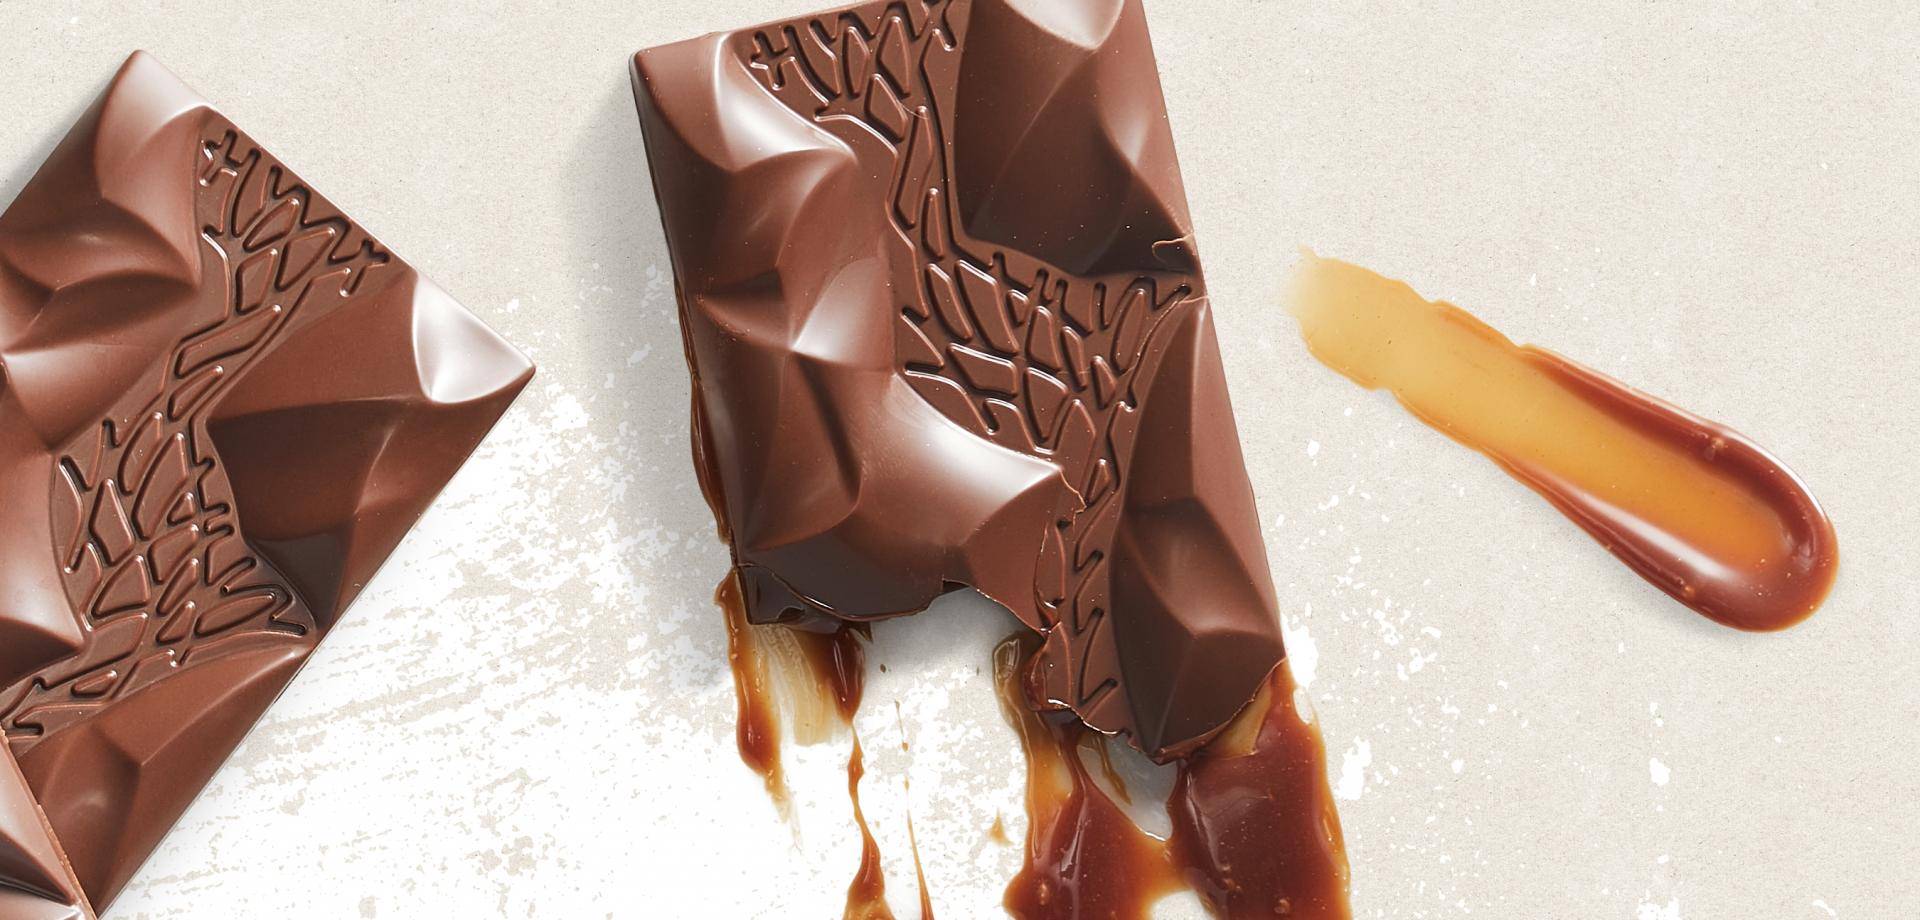 Download Callebaut NXT guides for vegan, plant-based, dairy-free chocolate delights